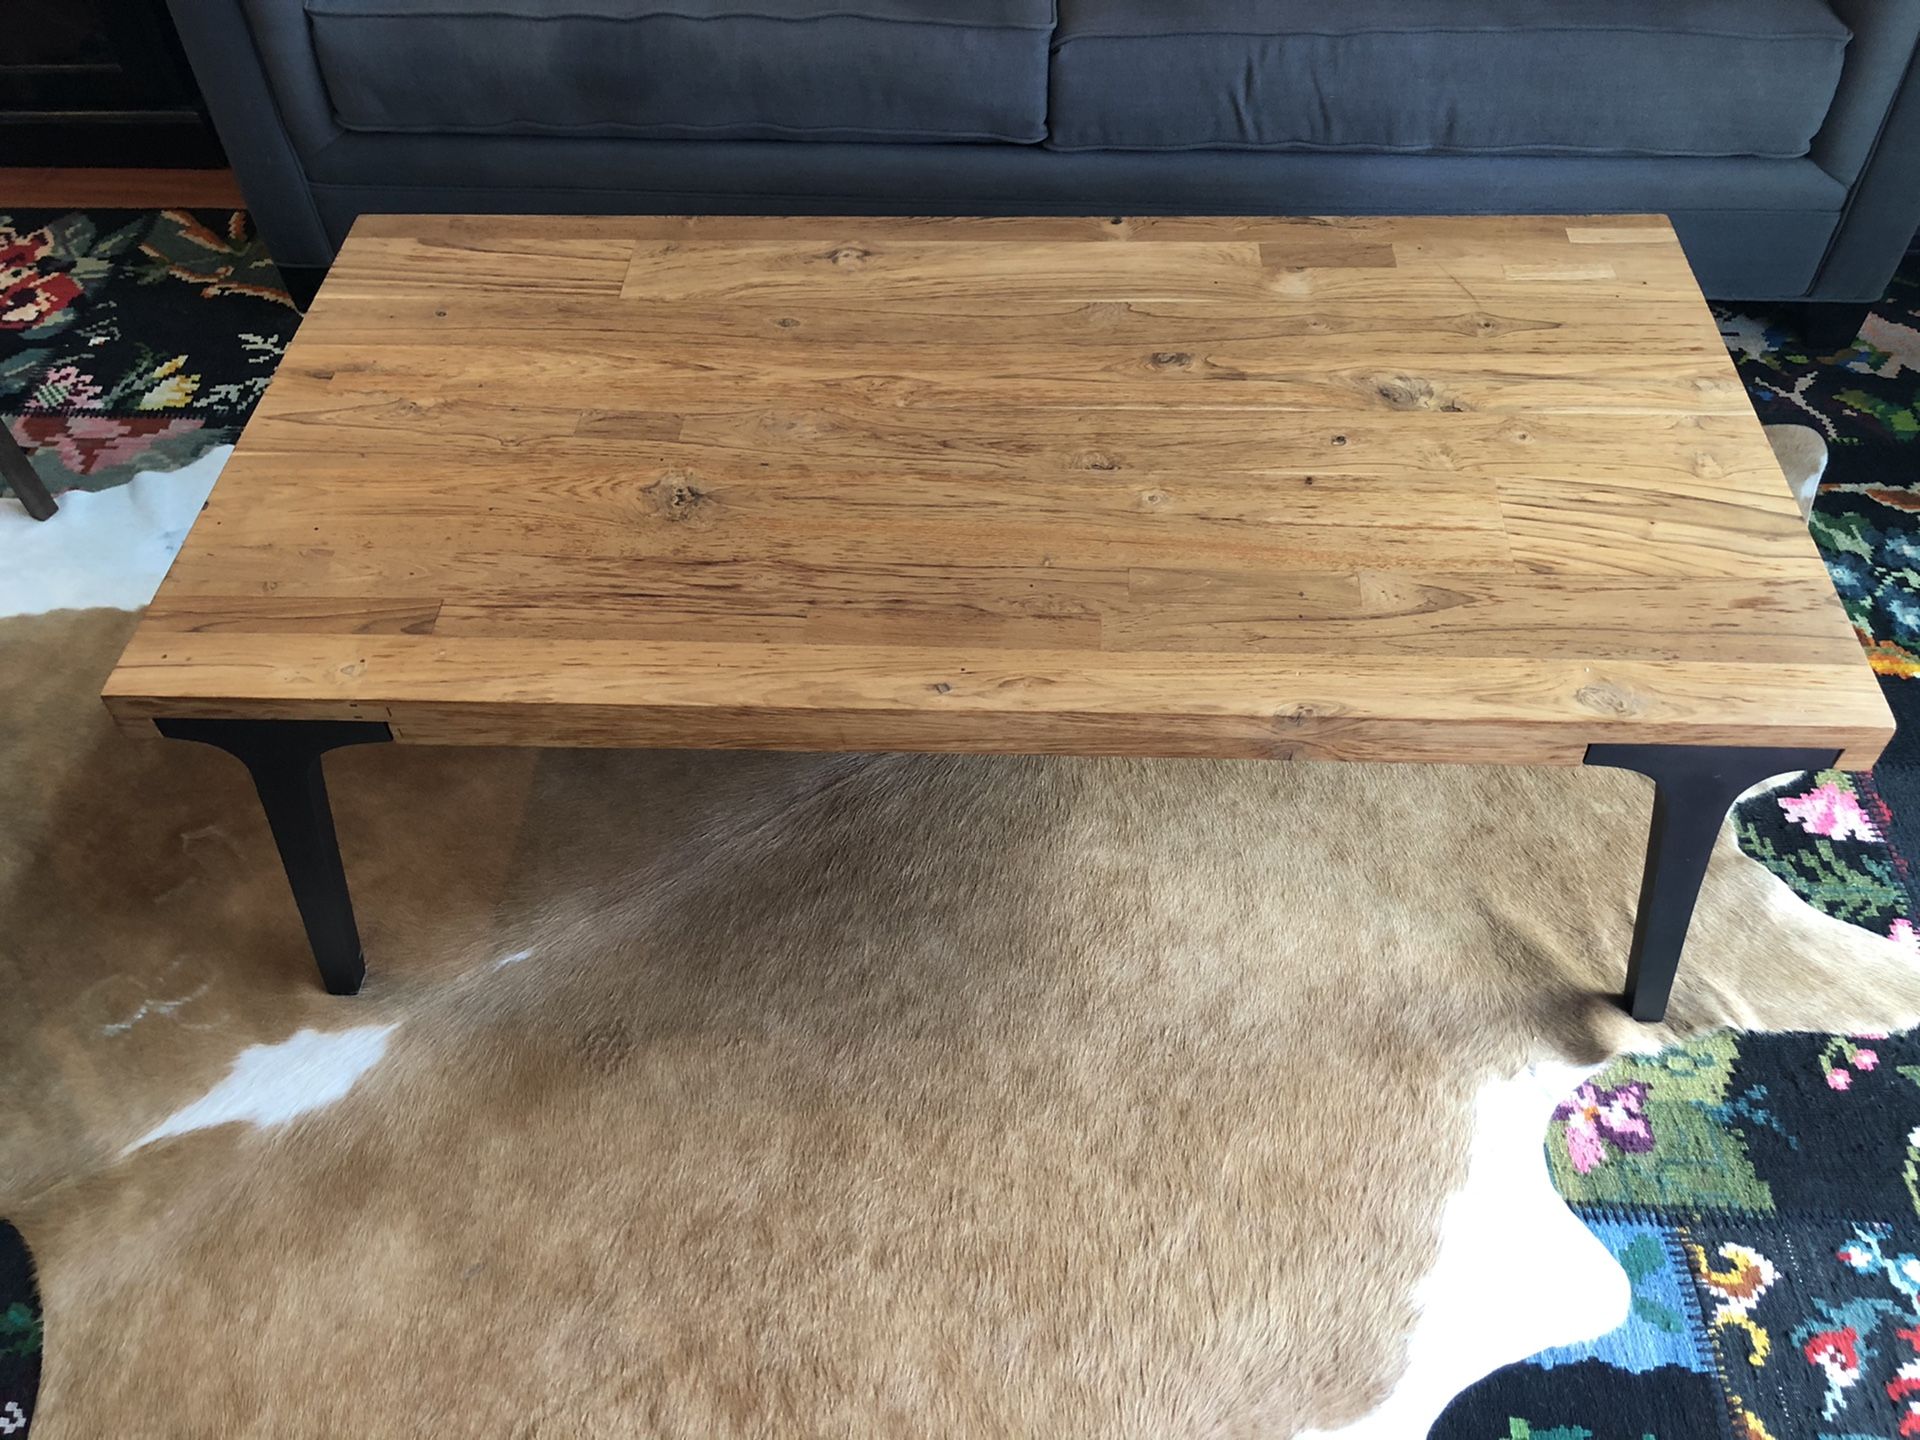 Price update: Crate & Barrel Lavin recycled teak coffee table